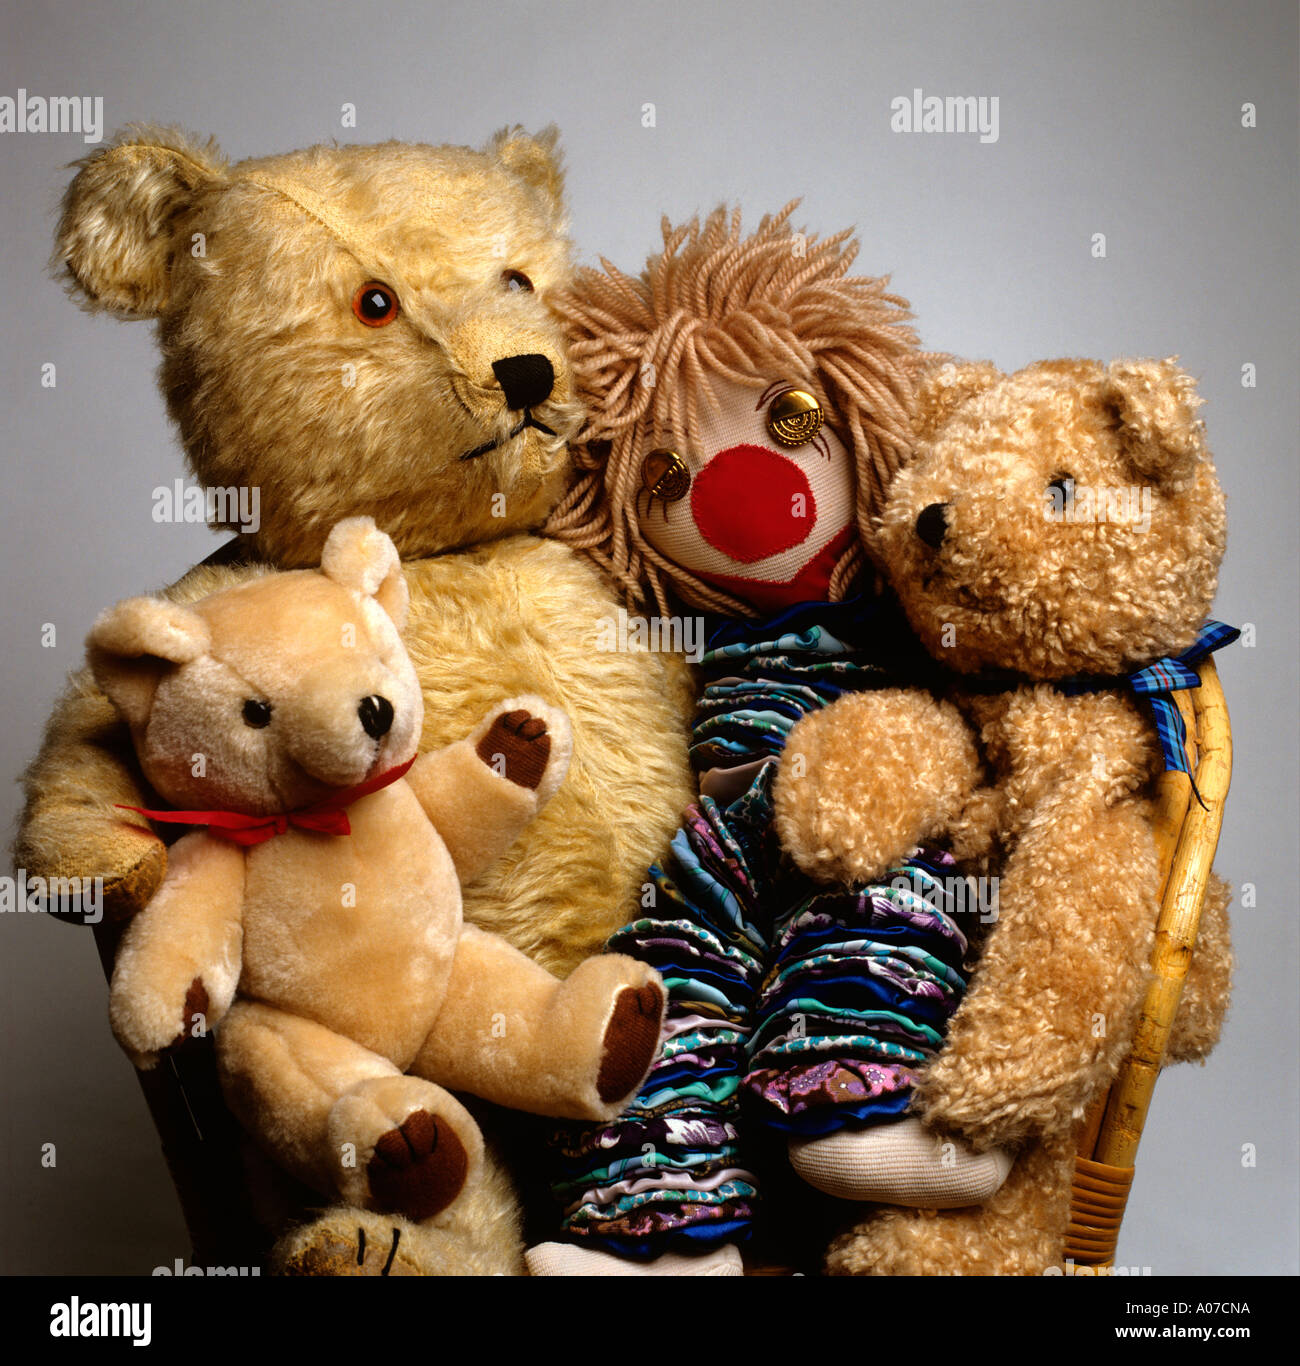 Childhood family of soft toys Stock Photo